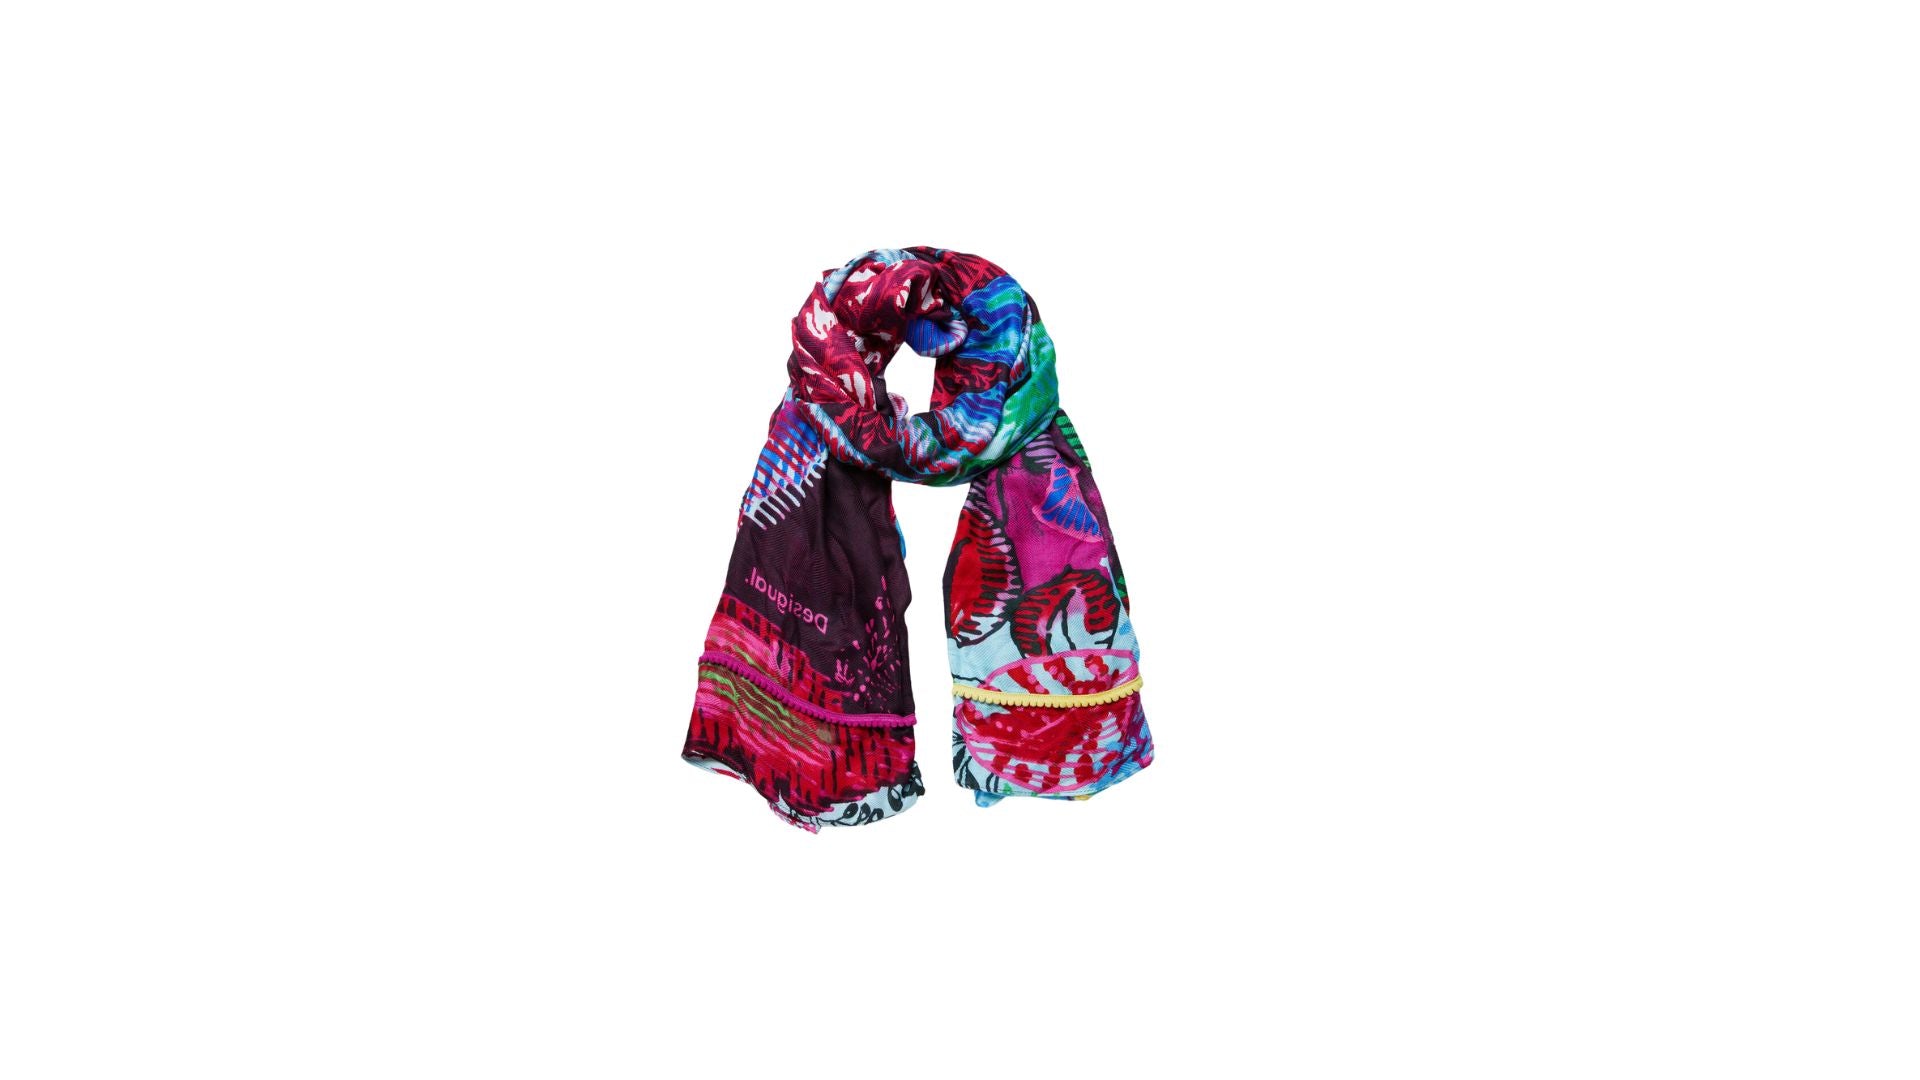 Scarves
<div style="text-align: center;"><strong>We love scarves! They add the finishing touch to any outfit and can be worn day or evening.</strong></div>

Le' Diva Boutique Store